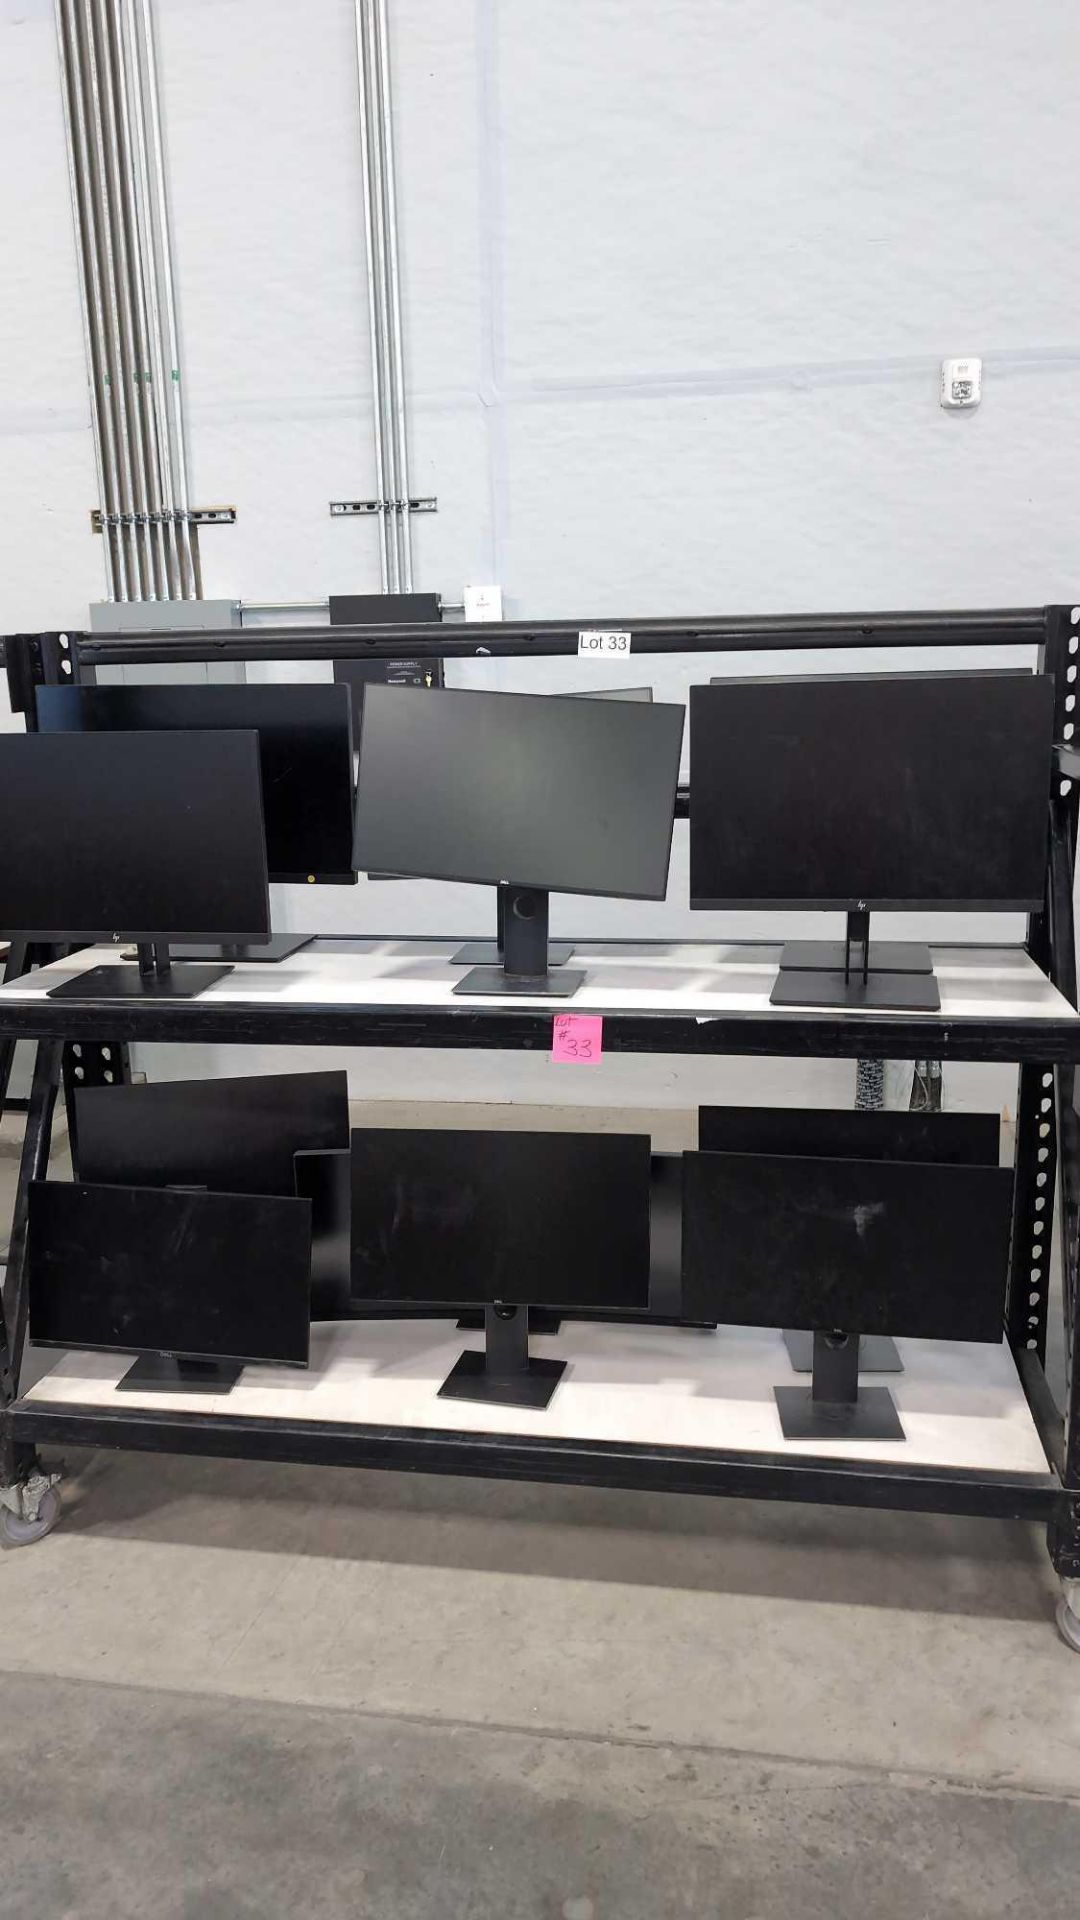 12 Dell Computer Monitors, one curved - Image 3 of 3